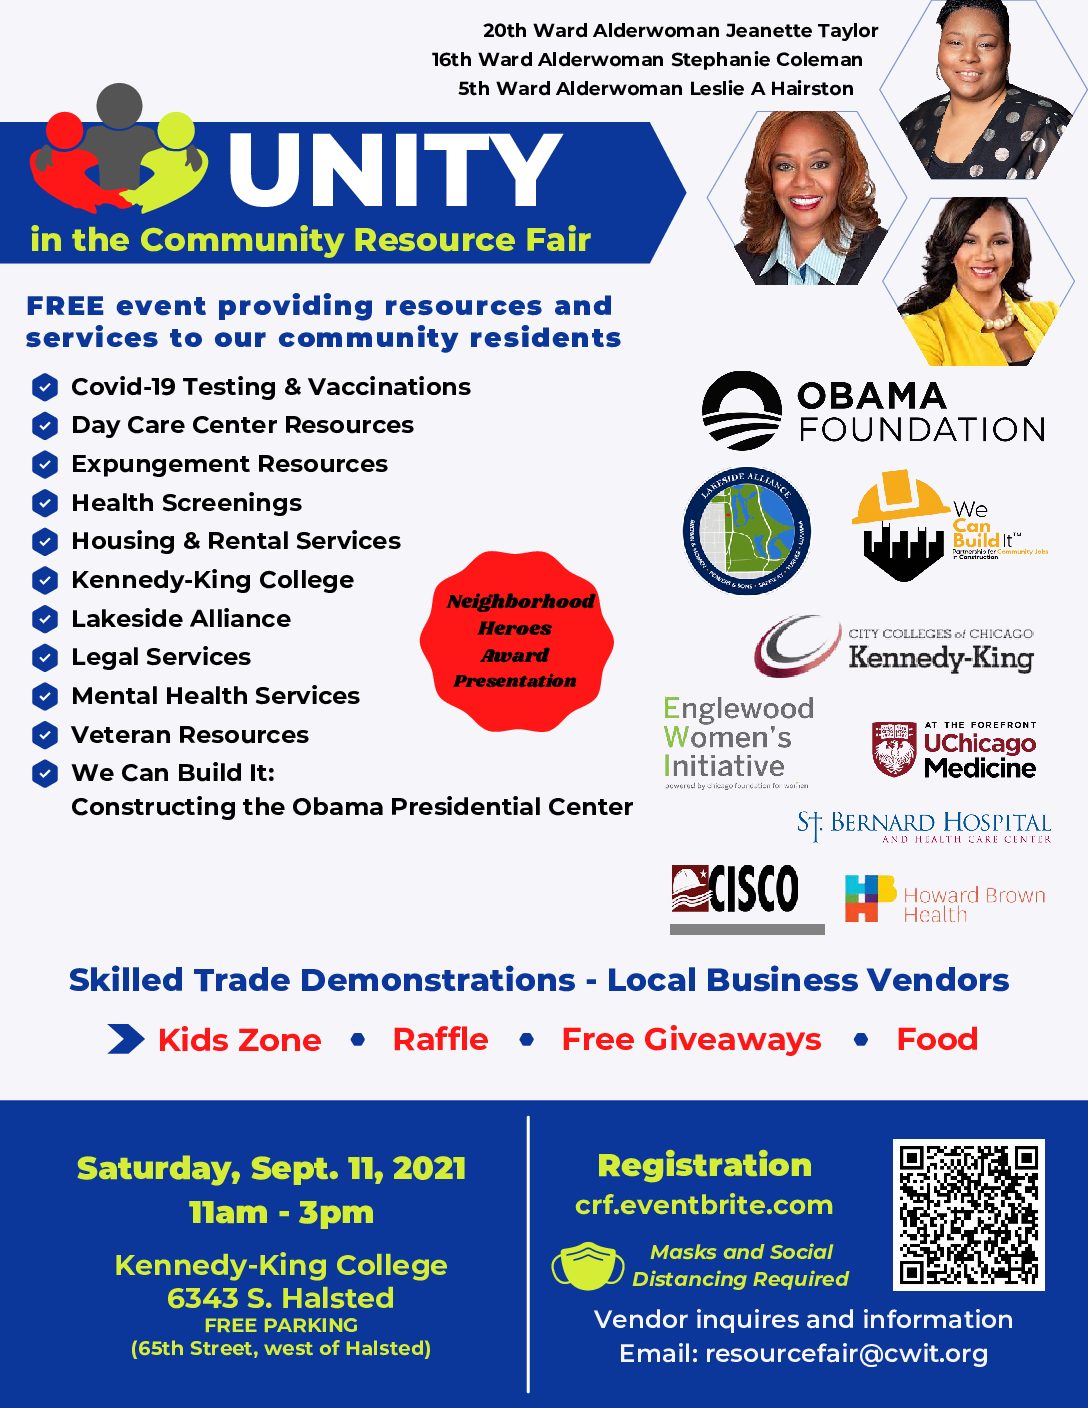 Eng 9Unity in the Community Resource Fair (8.5 x 11) (18)